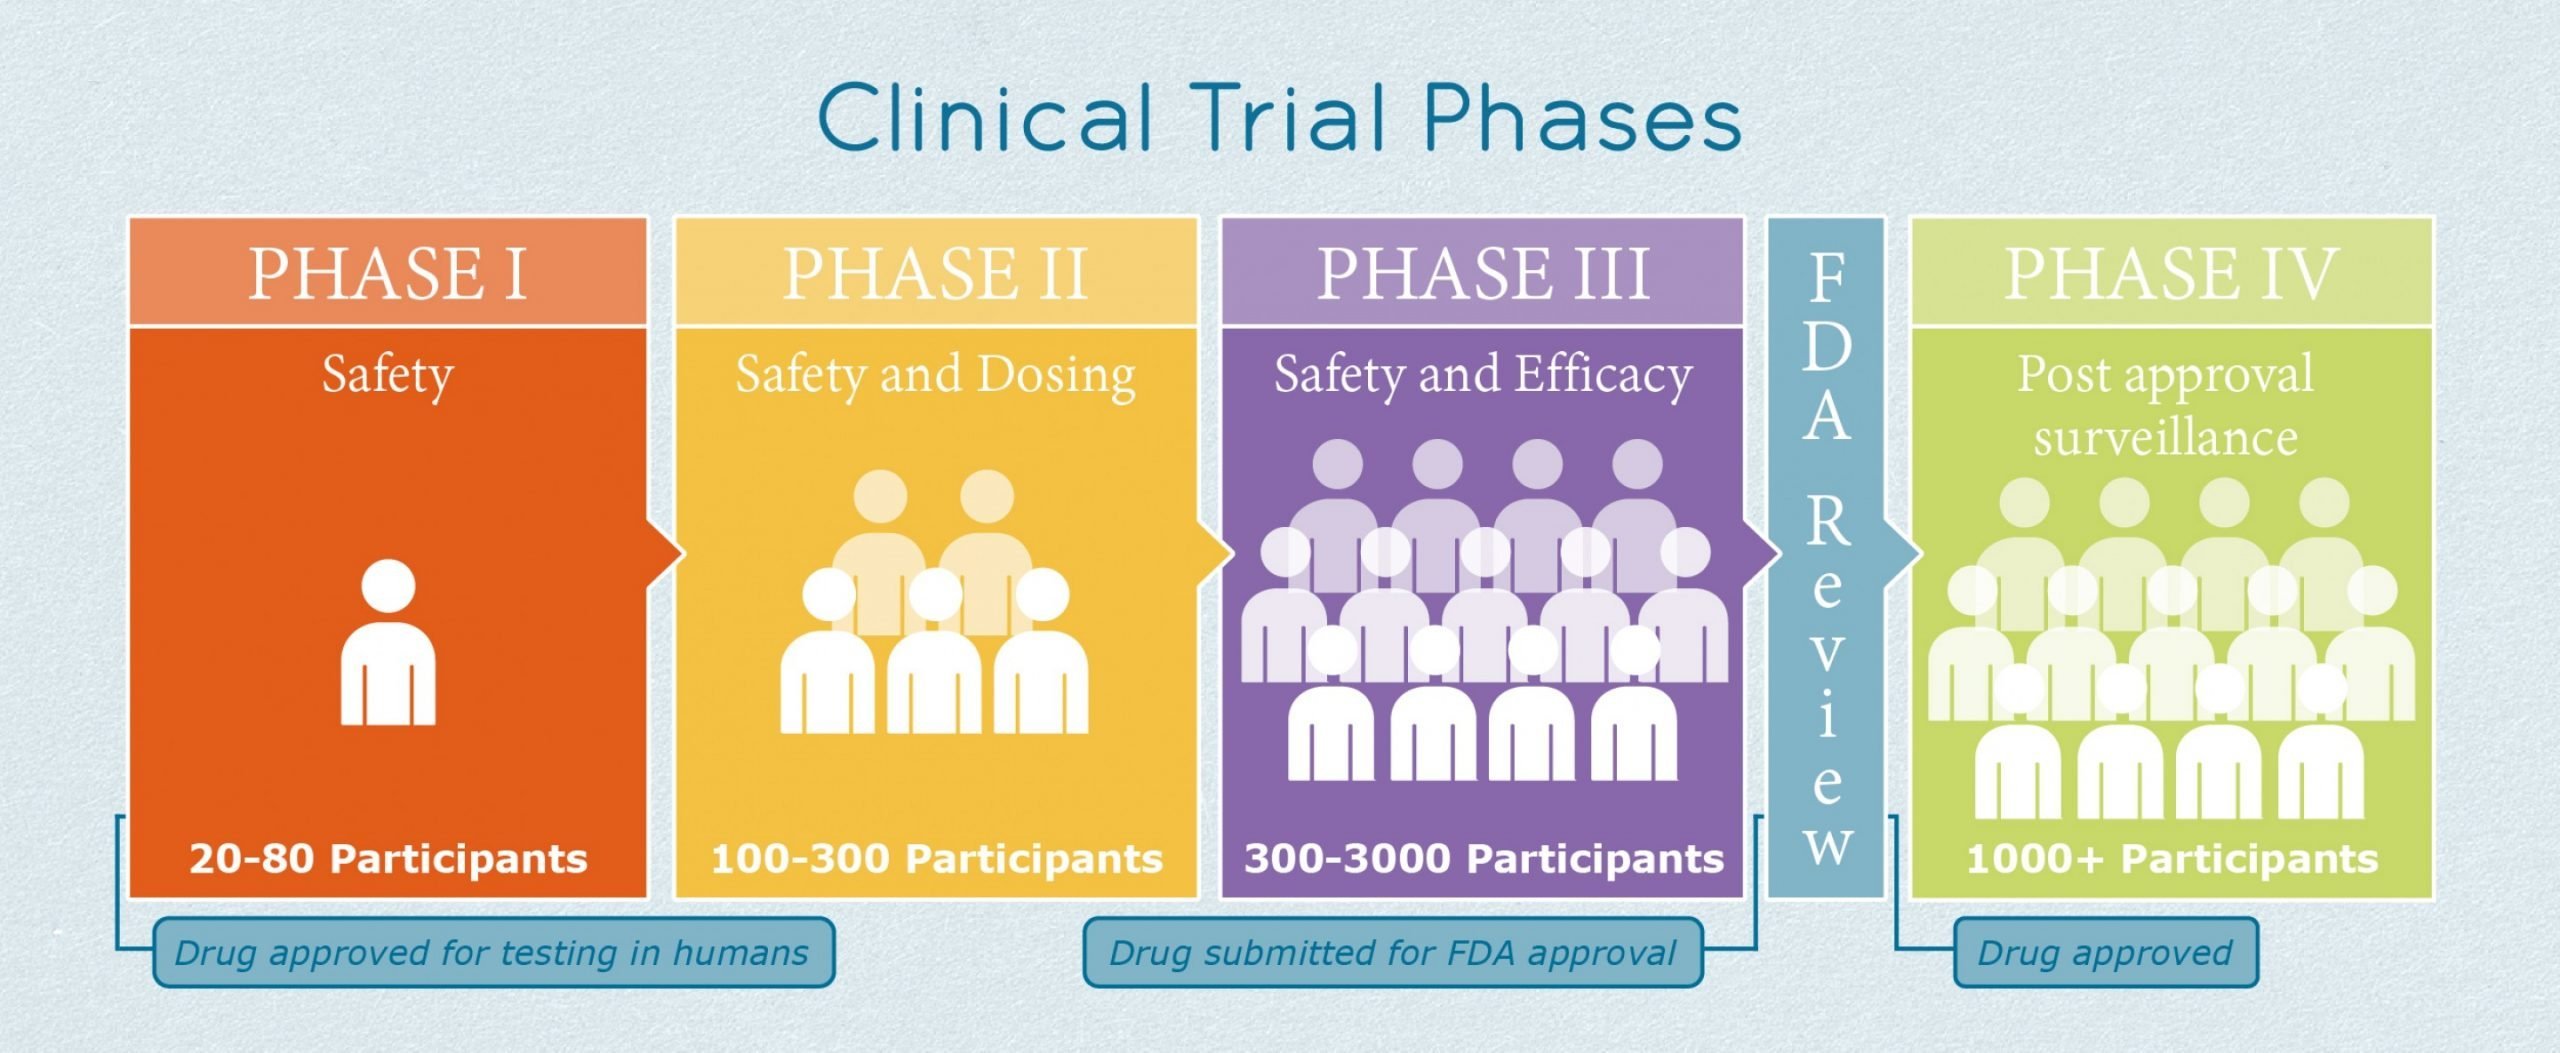 Phase III IPF Clinical Trials